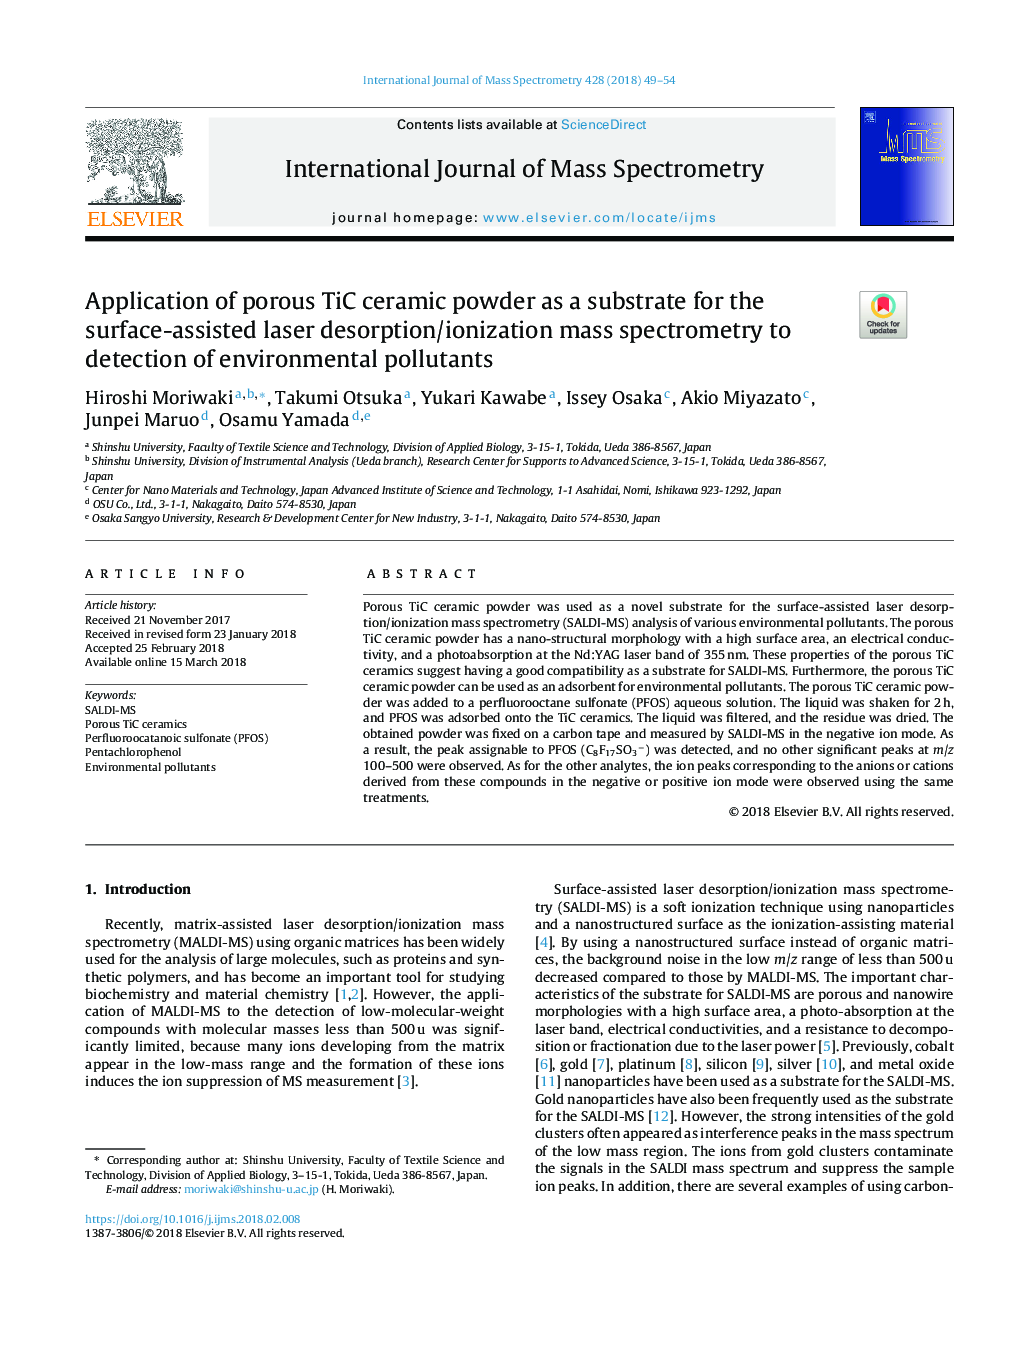 Application of porous TiC ceramic powder as a substrate for the surface-assisted laser desorption/ionization mass spectrometry to detection of environmental pollutants